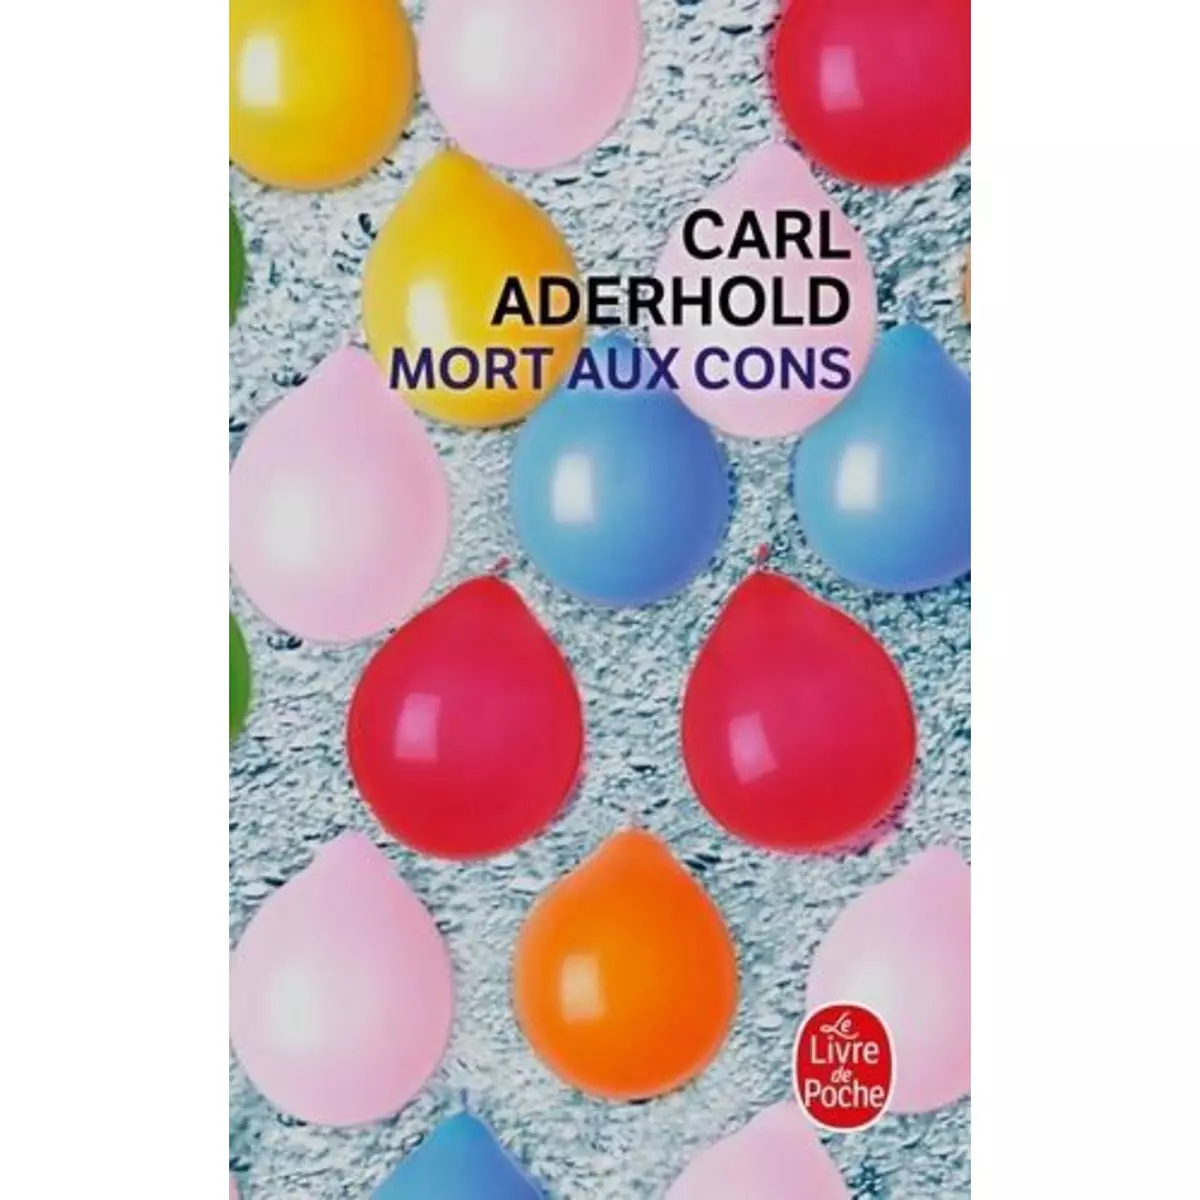  MORT AUX CONS, Aderhold Carl